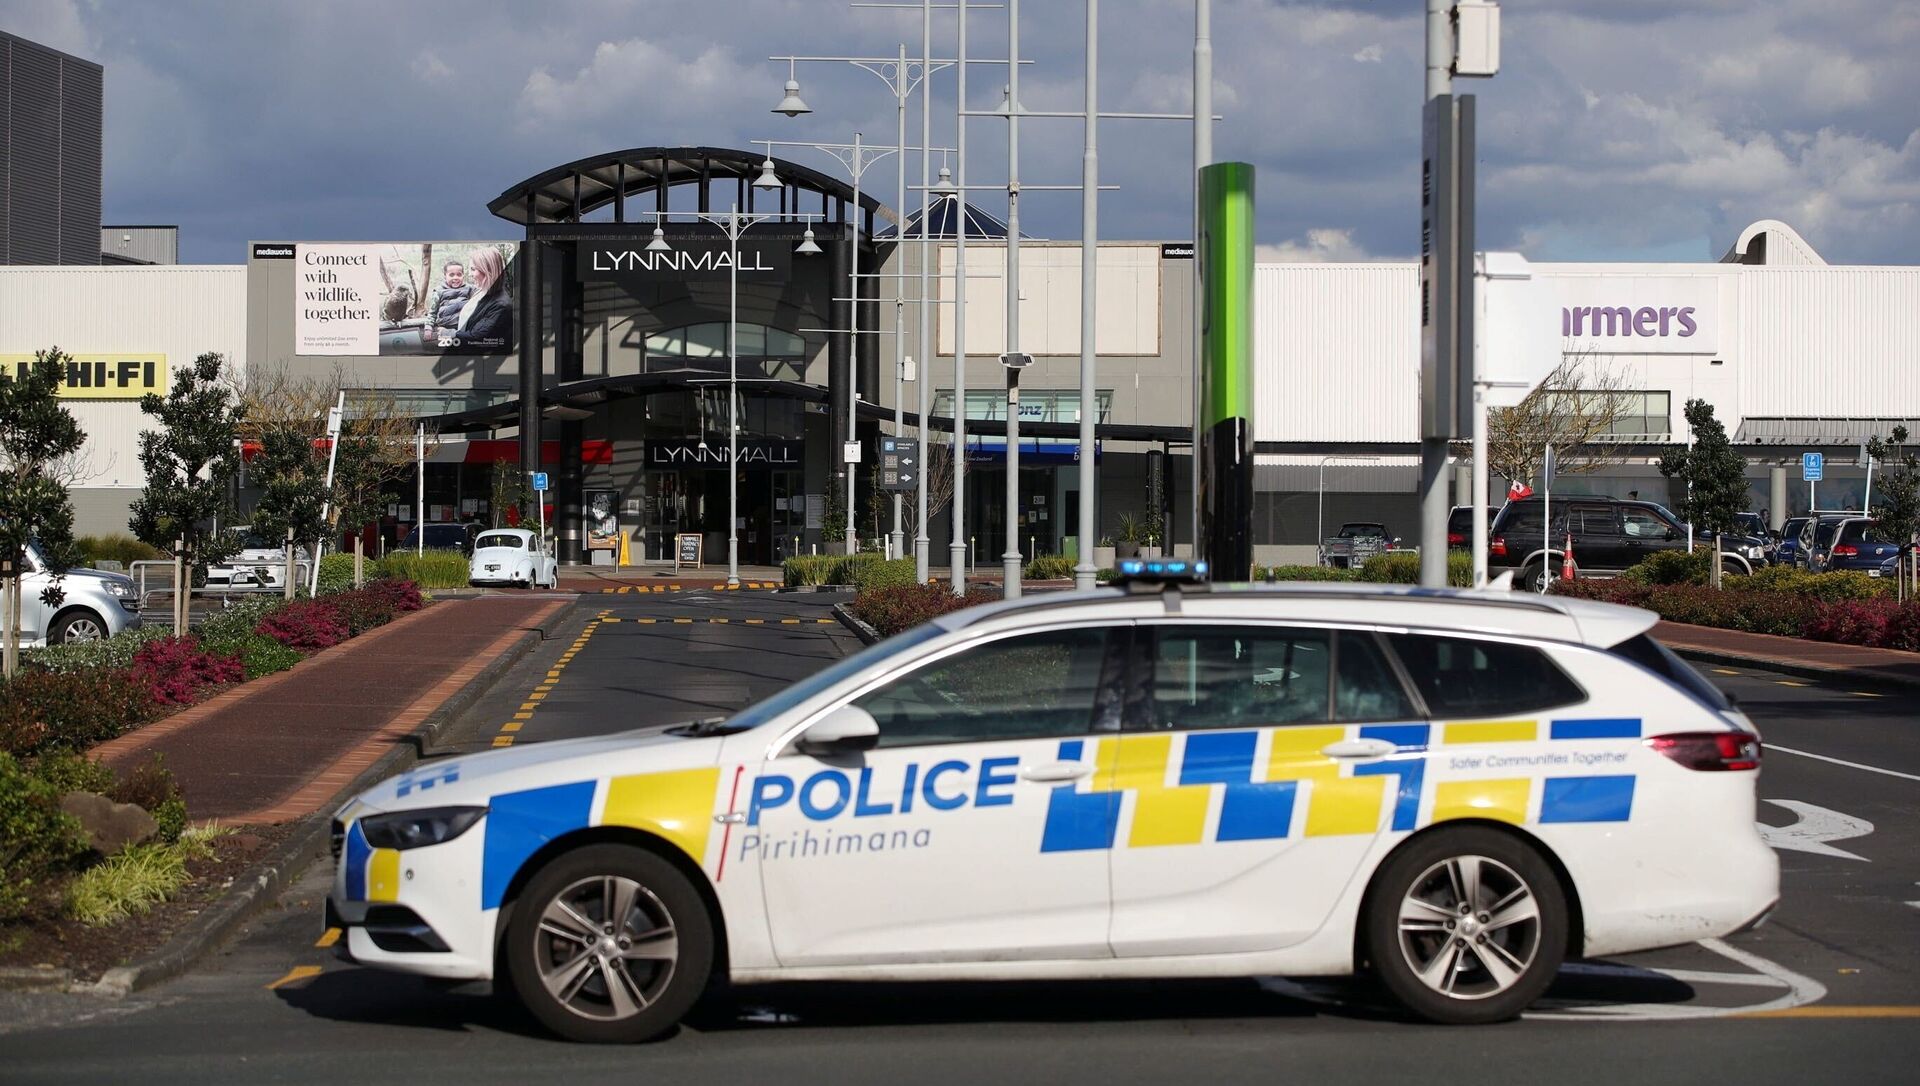 Police respond to the scene of an attack carried out by a man shot dead by police after he injured multiple people at a shopping mall in Auckland, New Zealand, September 3, 2021 - Sputnik International, 1920, 05.09.2021